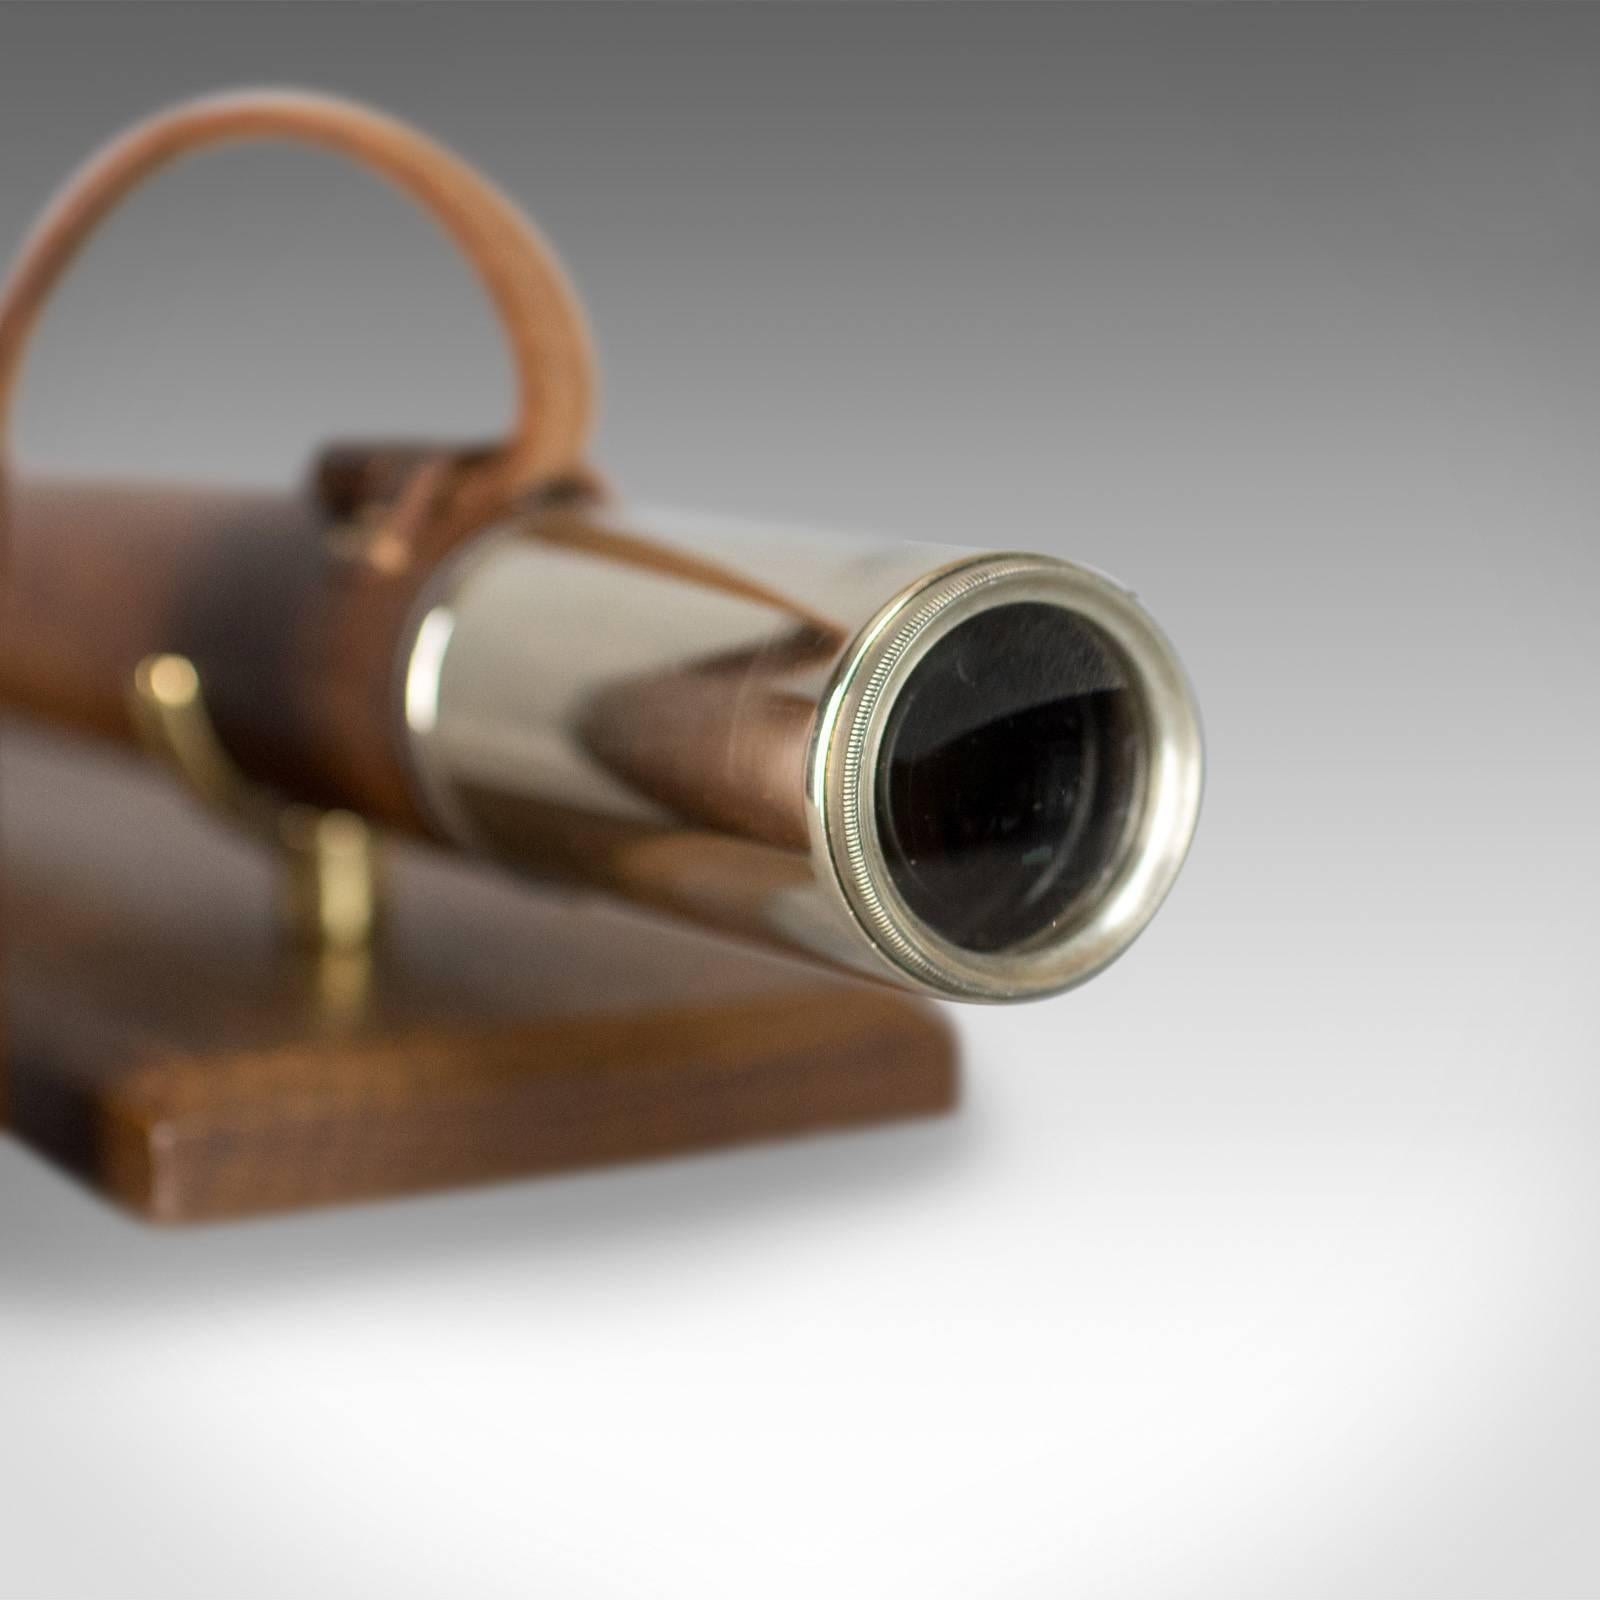 Edwardian Antique Telescope, a Franks Ltd, Manchester, Officer of the Watch